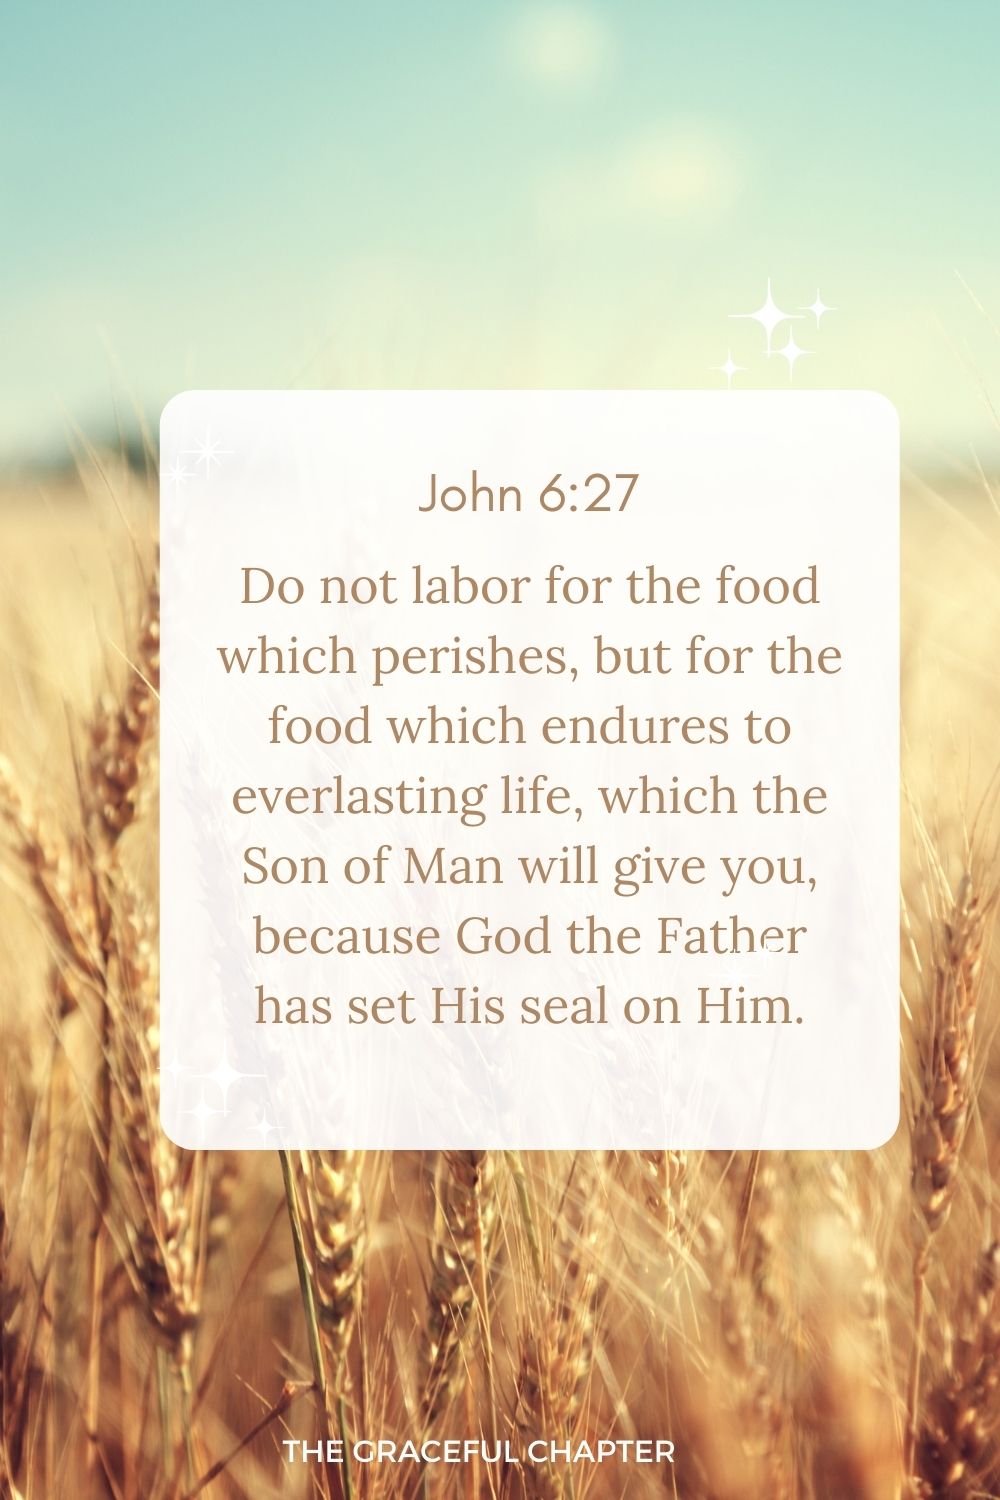 Do not labor for the food which perishes, but for the food which endures to everlasting life, which the Son of Man will give you, because God the Father has set His seal on Him. John 6:27